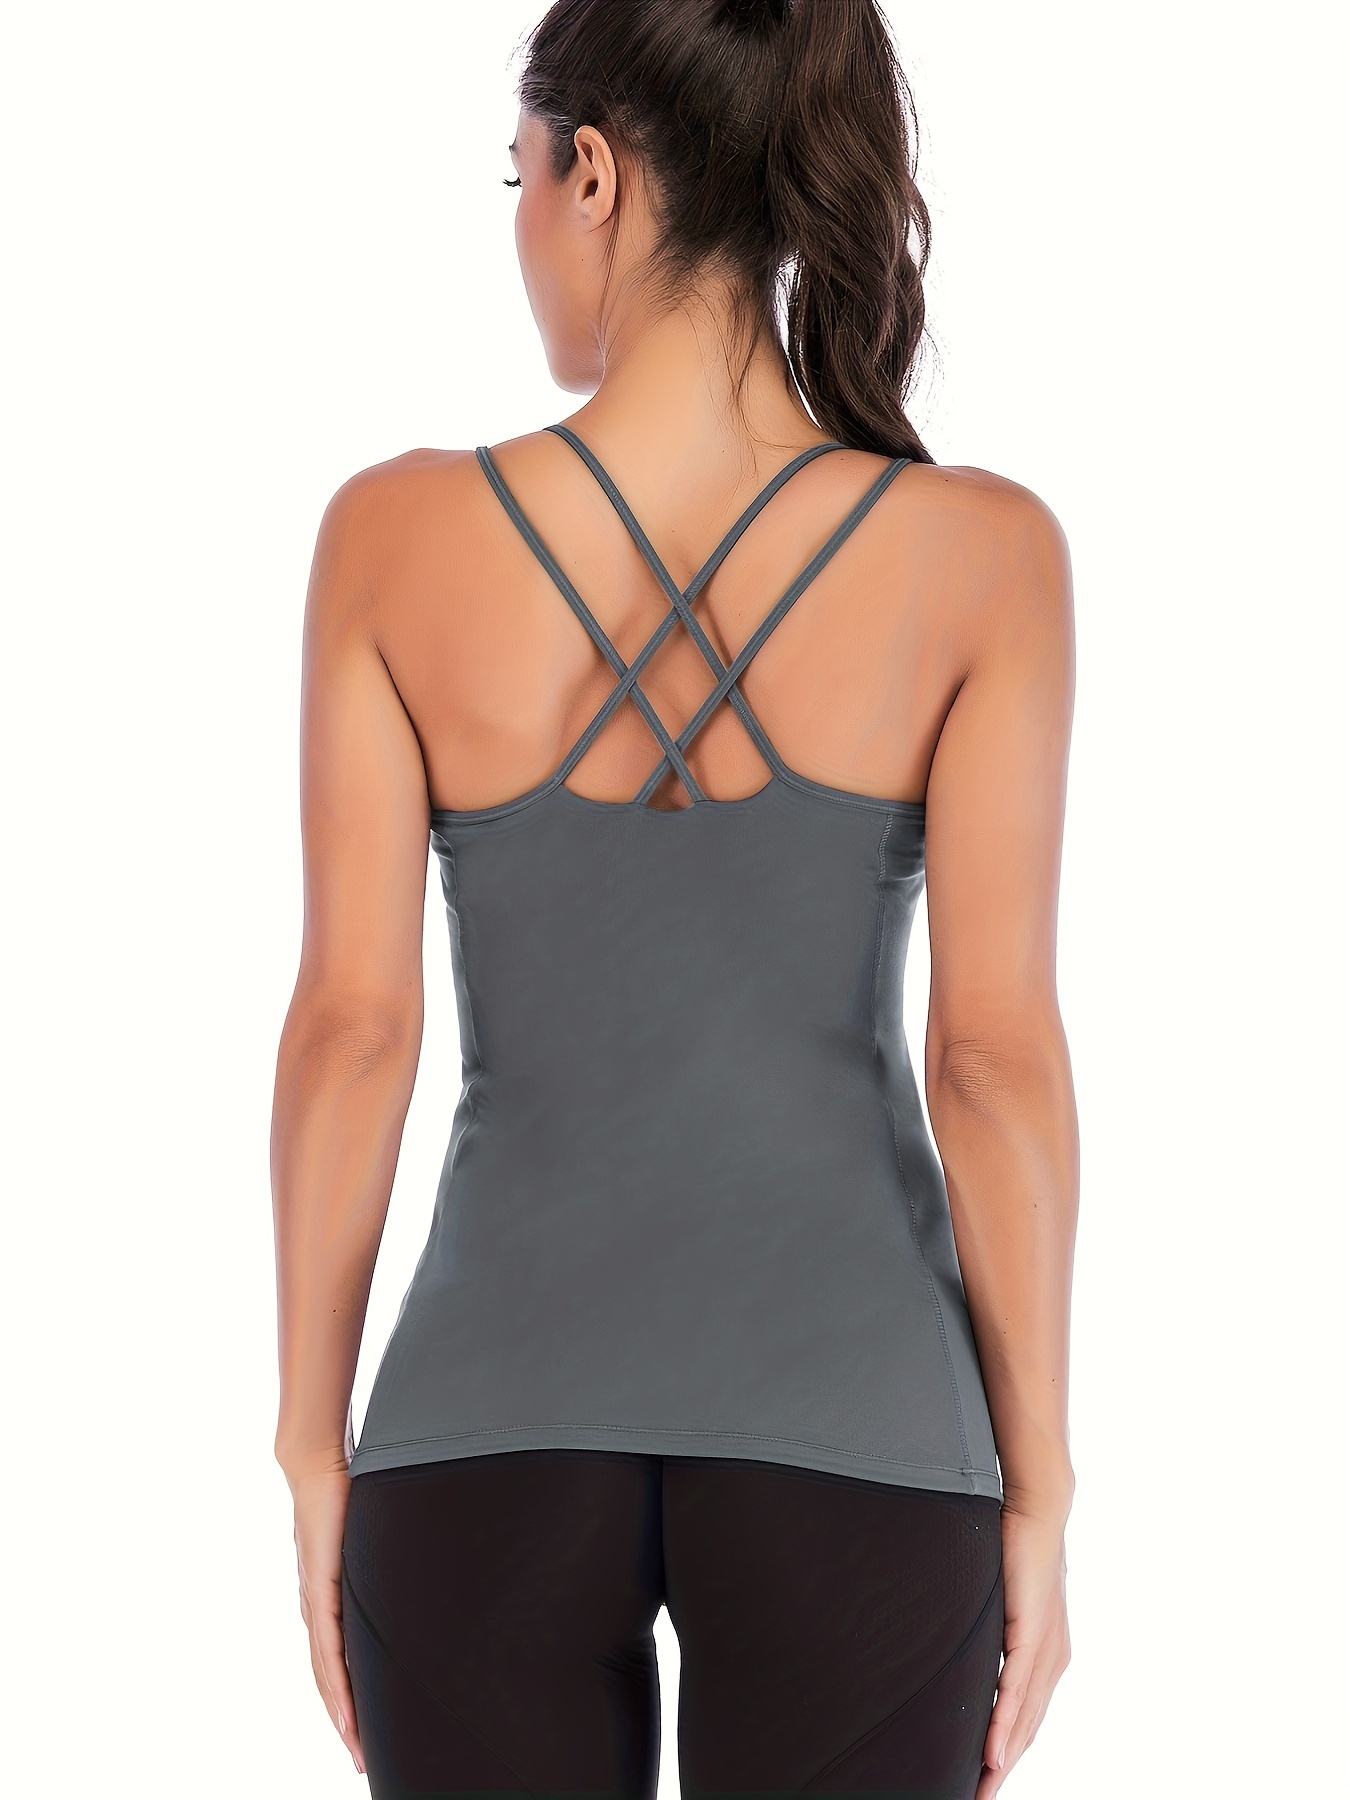 Women's Open Back Workout Tops Cute Yoga Tank Tops Flowy Athletic Gym Shirts